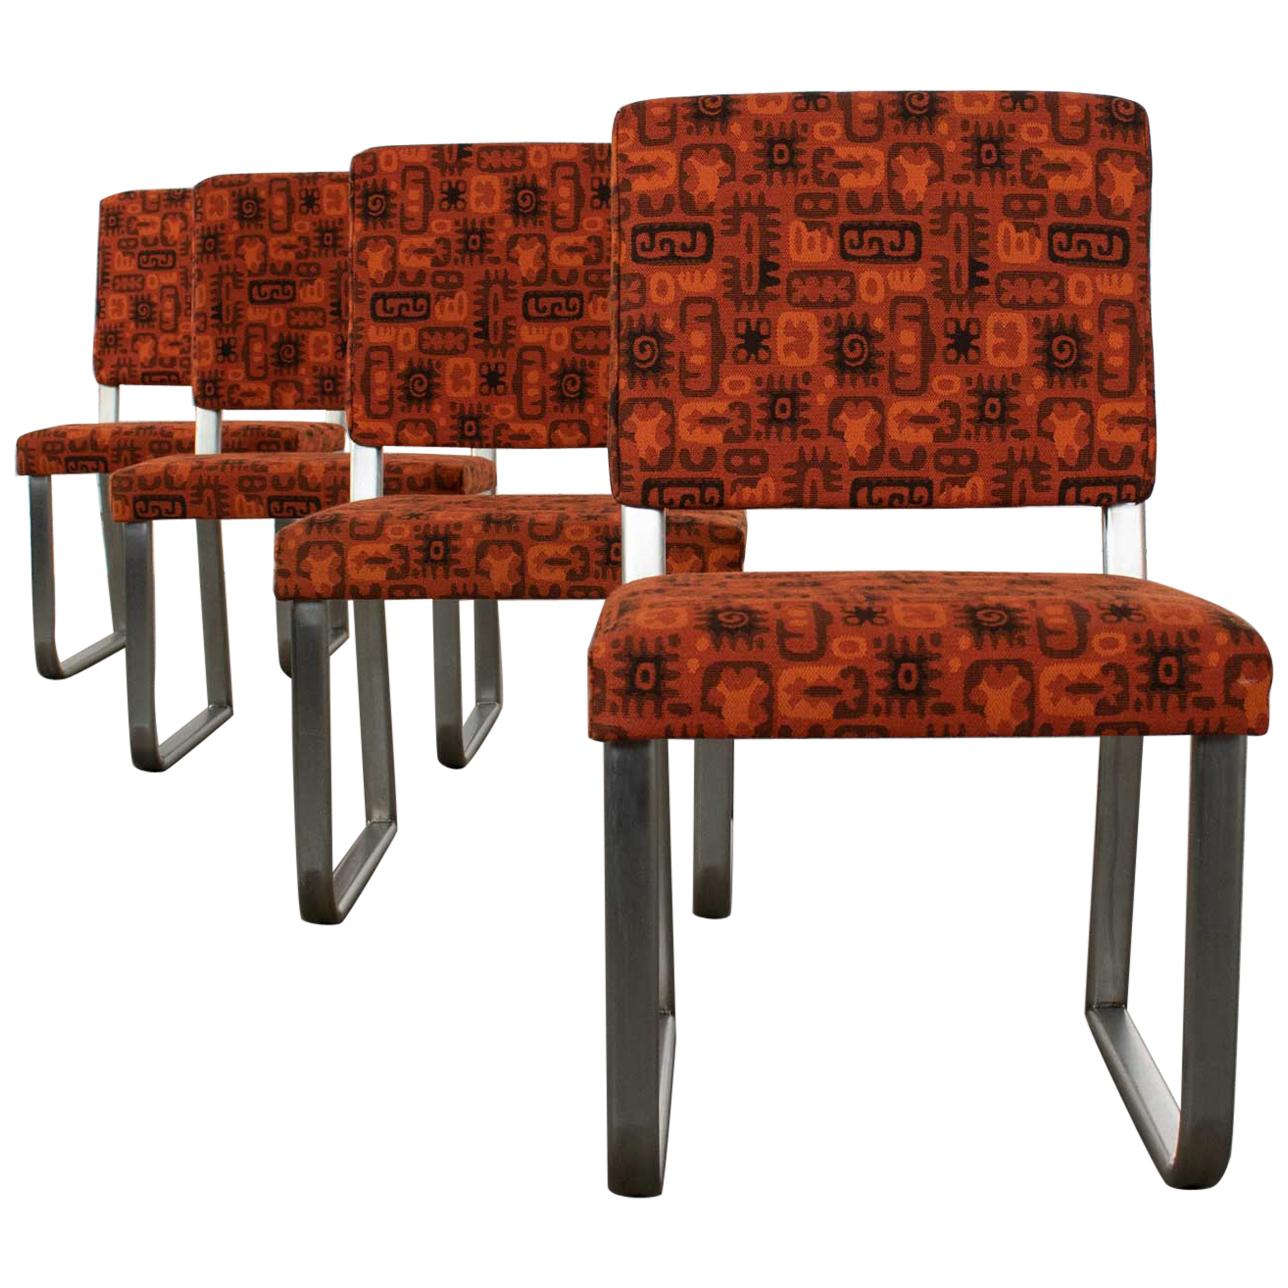 4 Streamline Modern Railroad Dining Car Chairs Stainless Steel and Orange Fabric For Sale